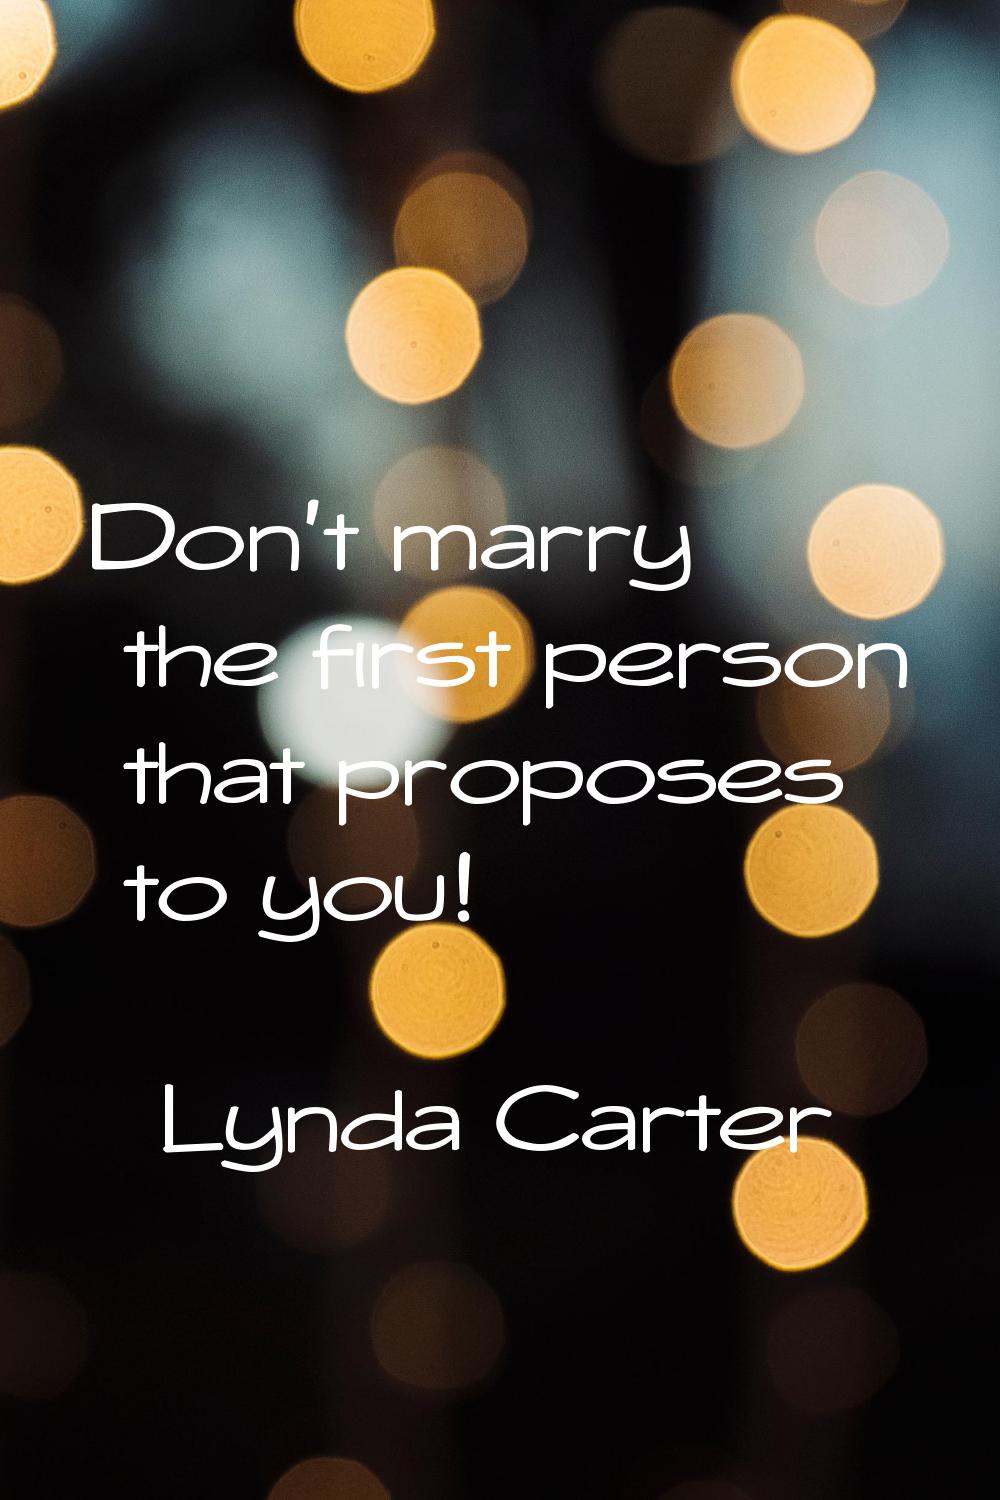 Don't marry the first person that proposes to you!